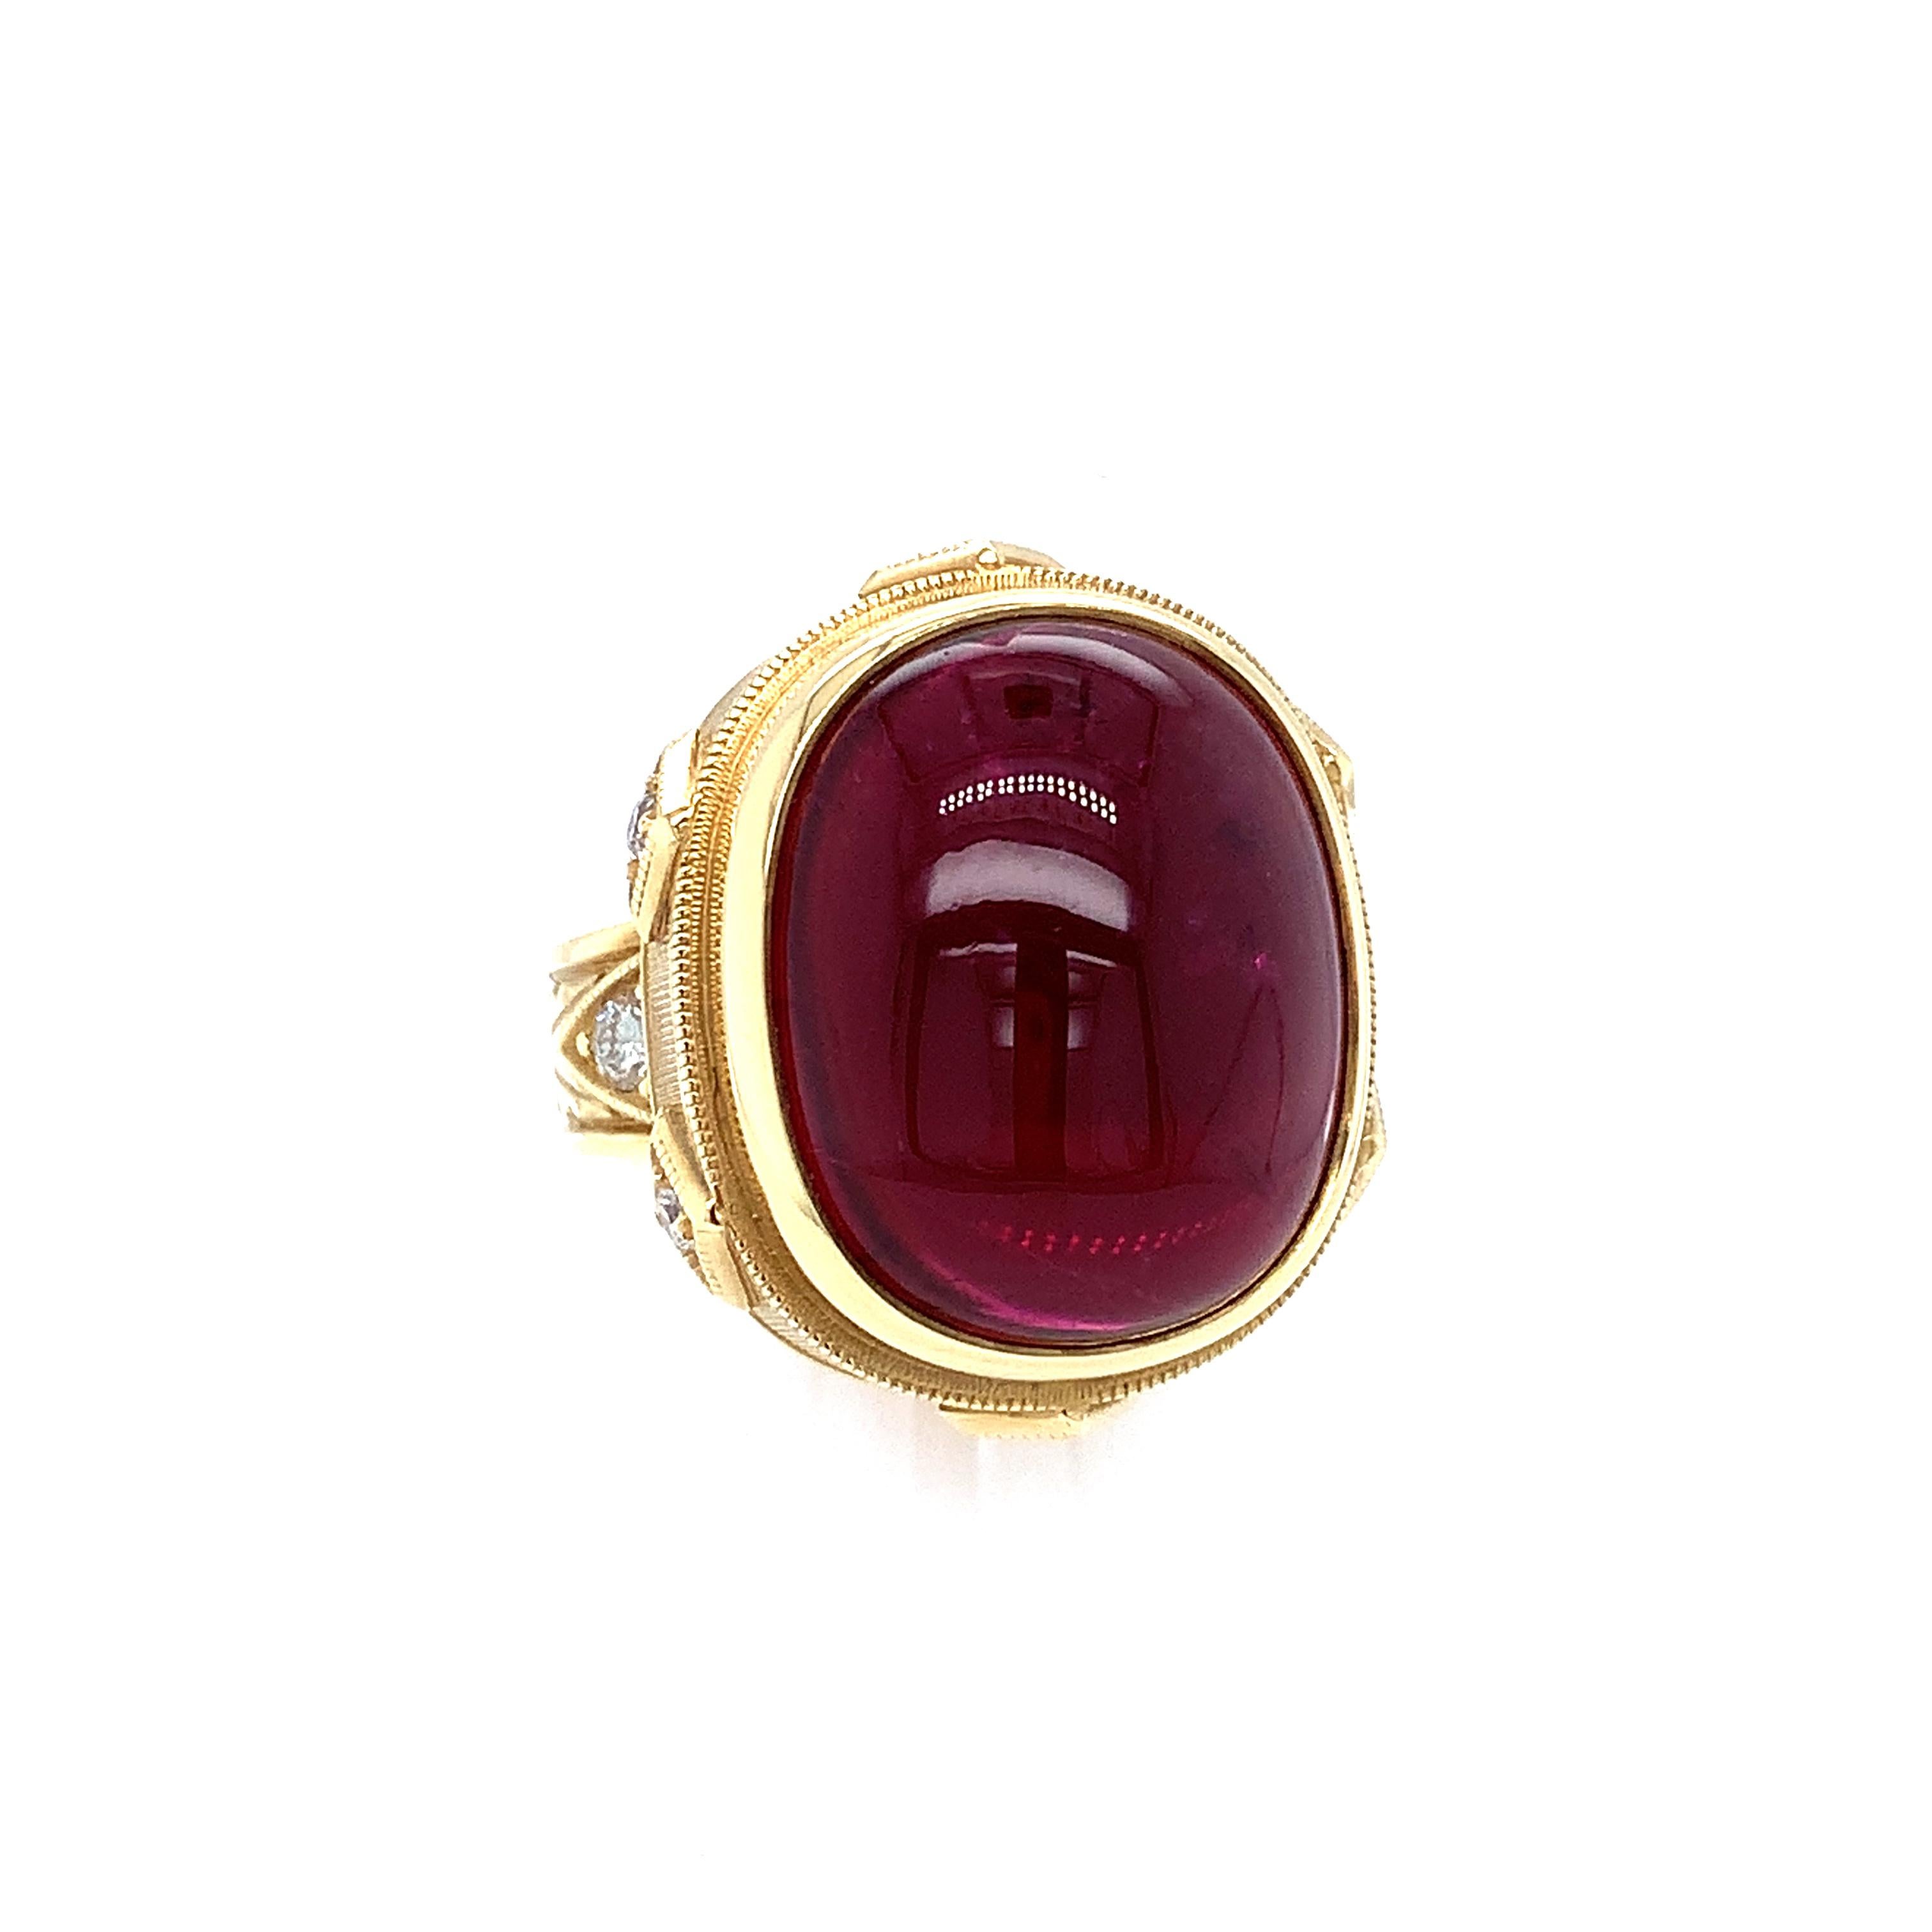 This beautiful 18k yellow gold handmade ring features a gorgeous 18.98 carat, intense fuchsia rubellite tourmaline cabochon with exceptional clarity! Our Master Jeweler created this magnificent tourmaline ring in one of our most popular signature